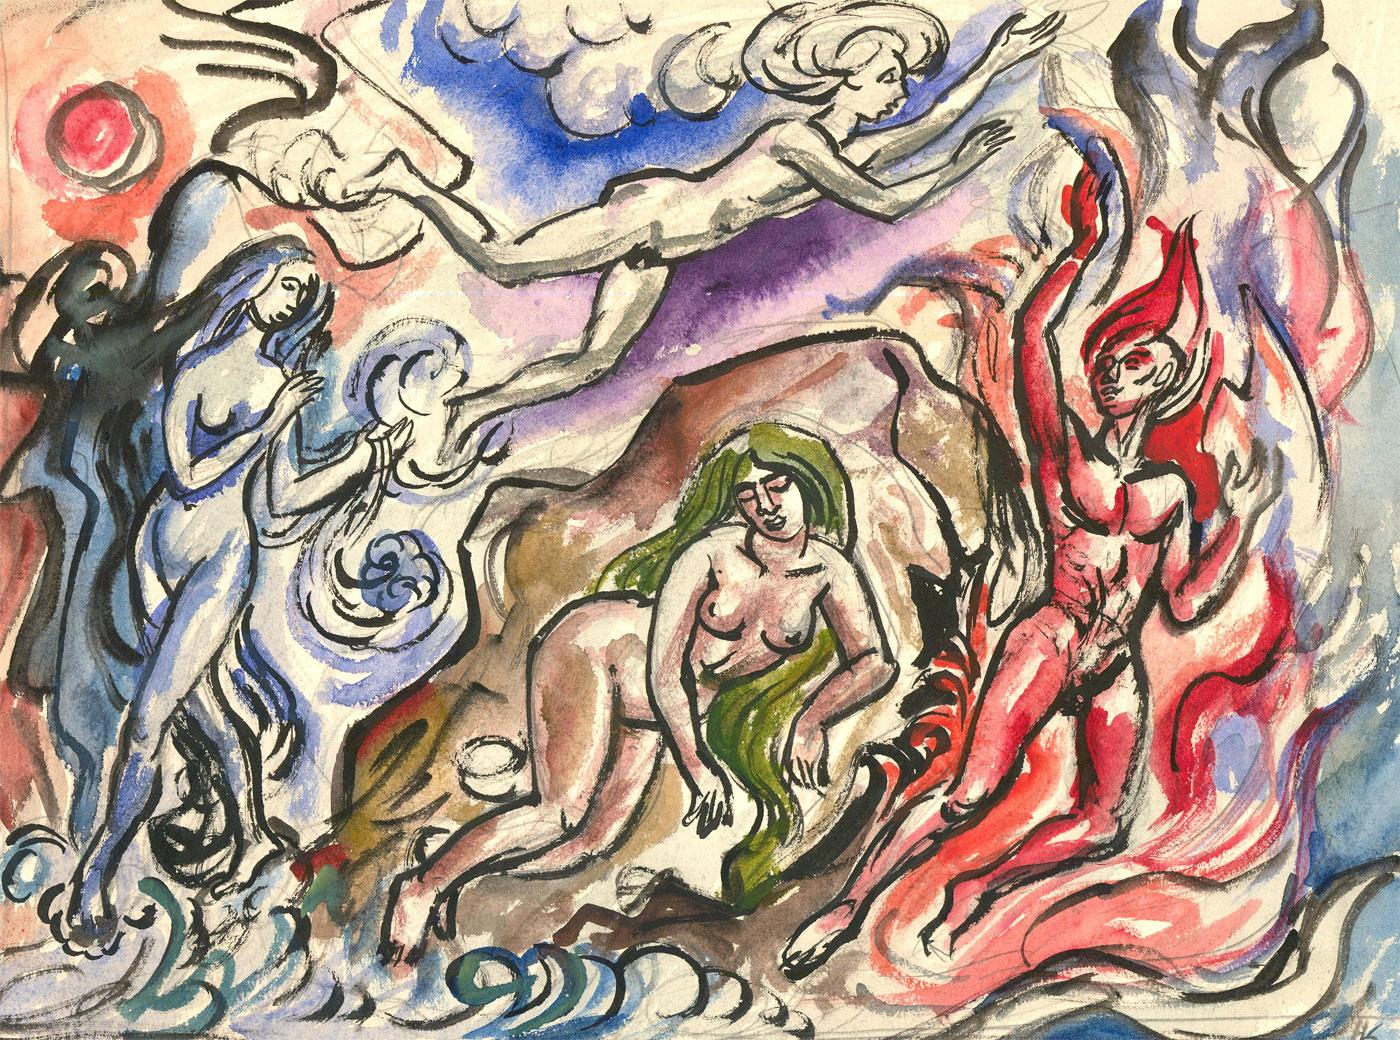 Unknown Nude - Helen Steinthal (1911-1991) - Double Sided Watercolour, Towards the Flames